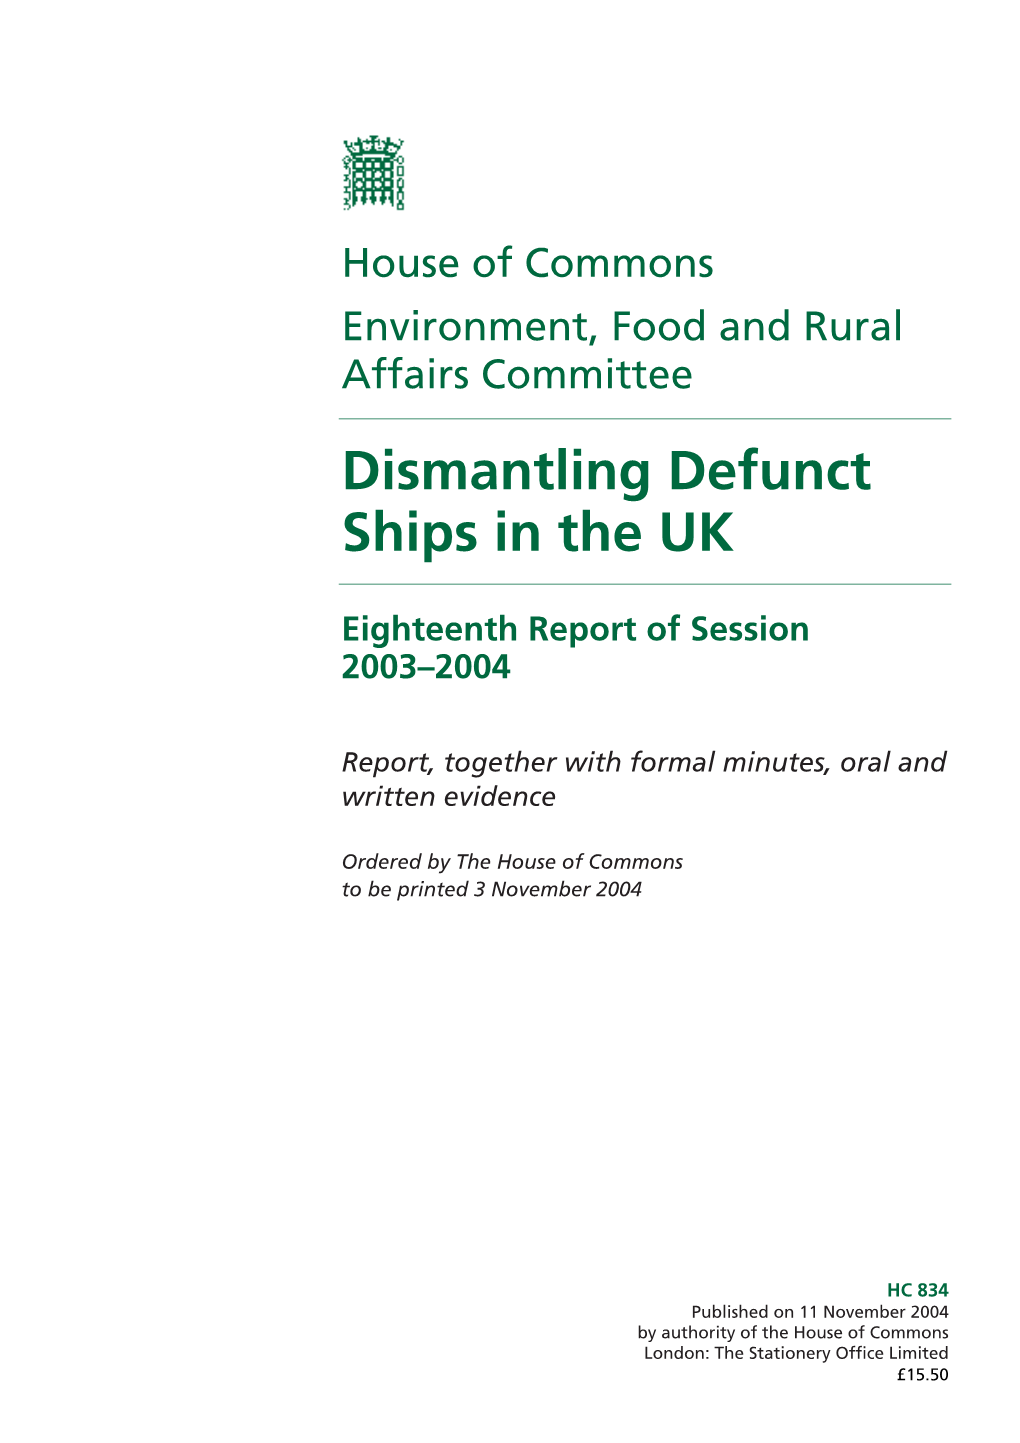 Dismantling Defunct Ships in the UK